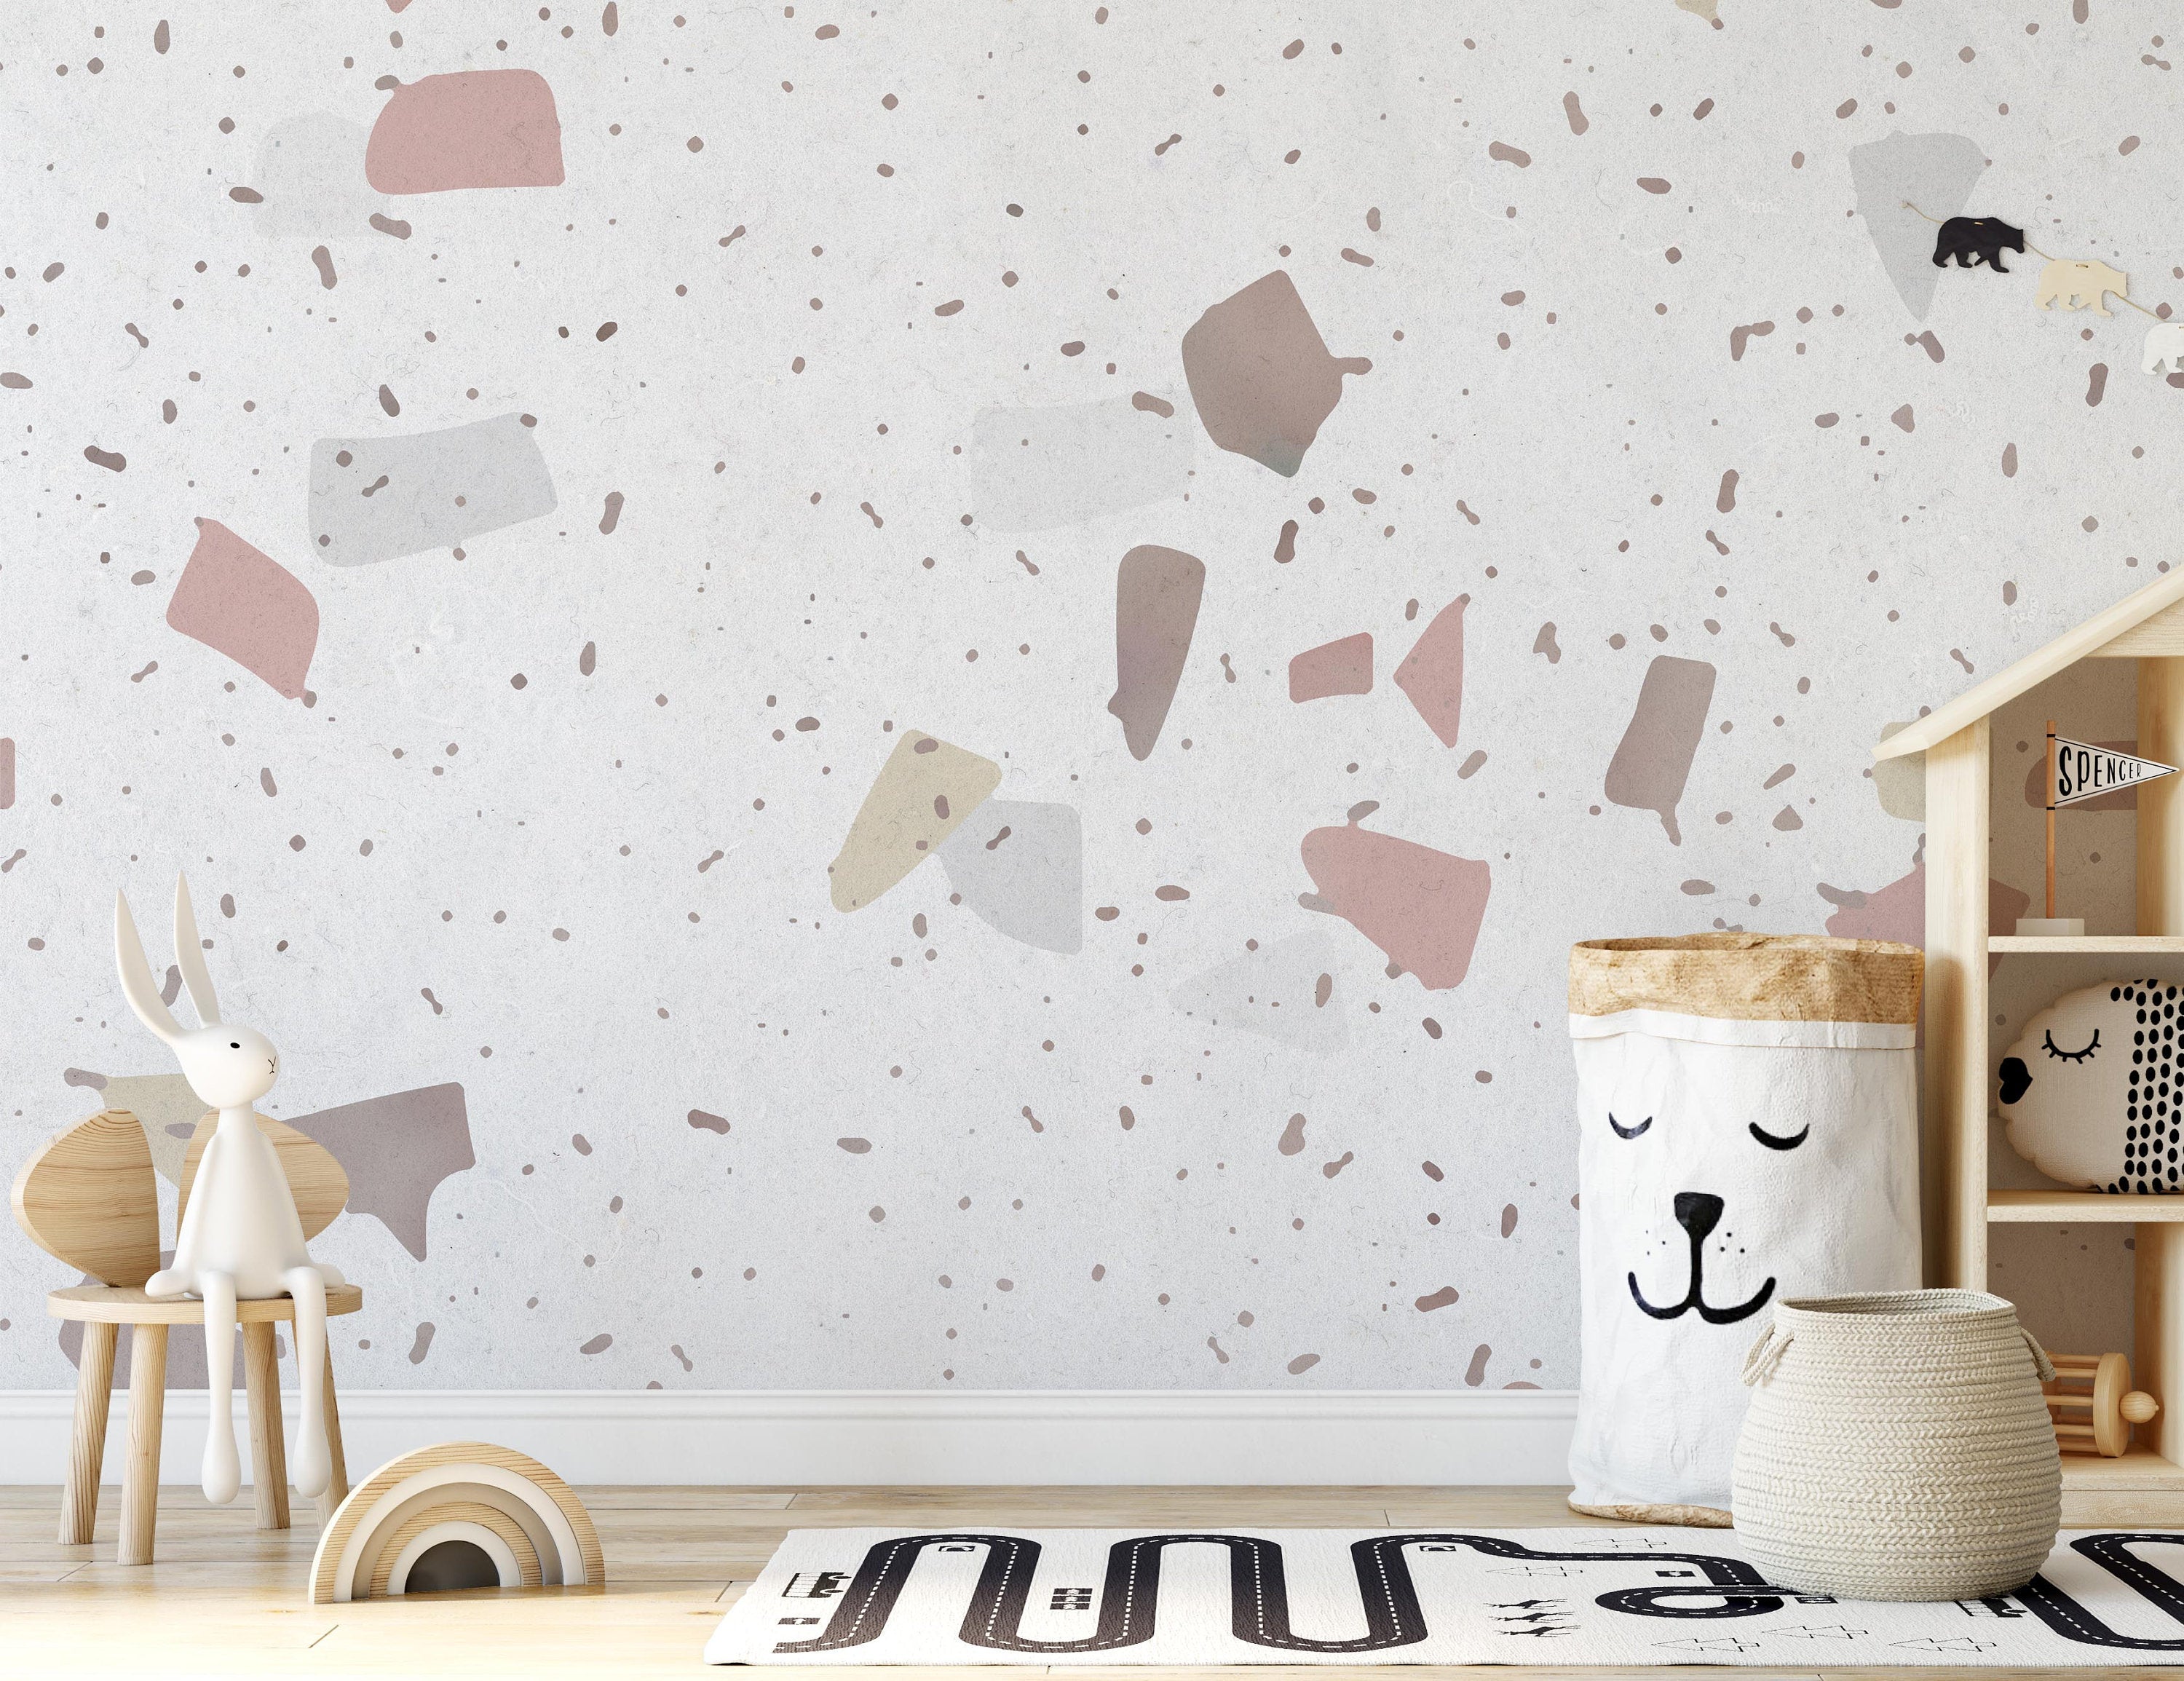 Colorful Abstract Stones Funny Wallpaper Self Adhesive Peel and Stick Wall Sticker Wall Decoration Scandinavian Removable